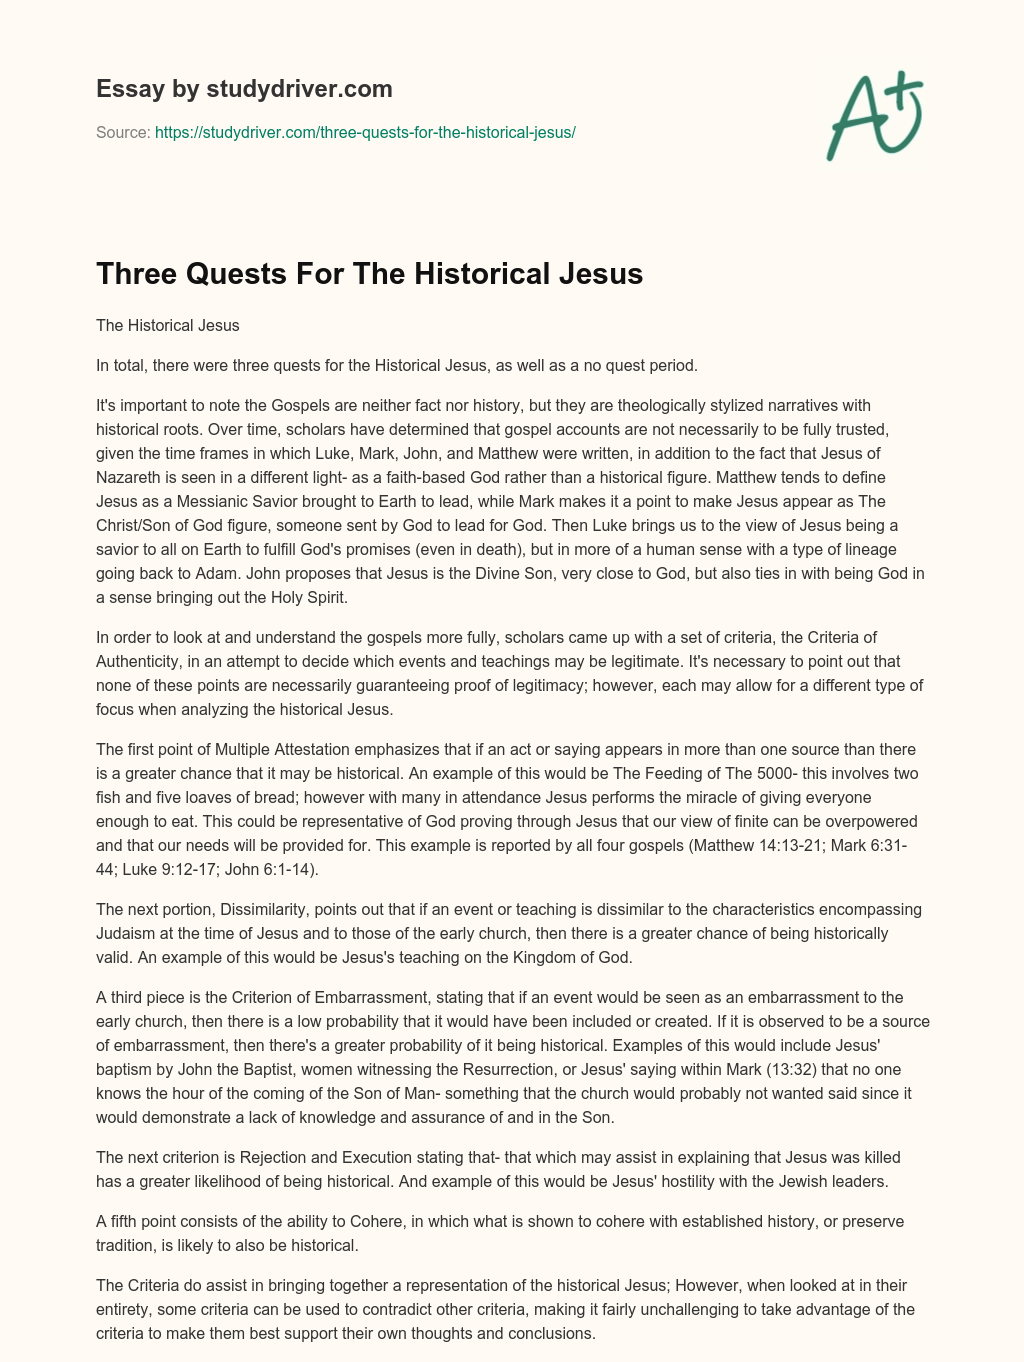 Three Quests for the Historical Jesus essay